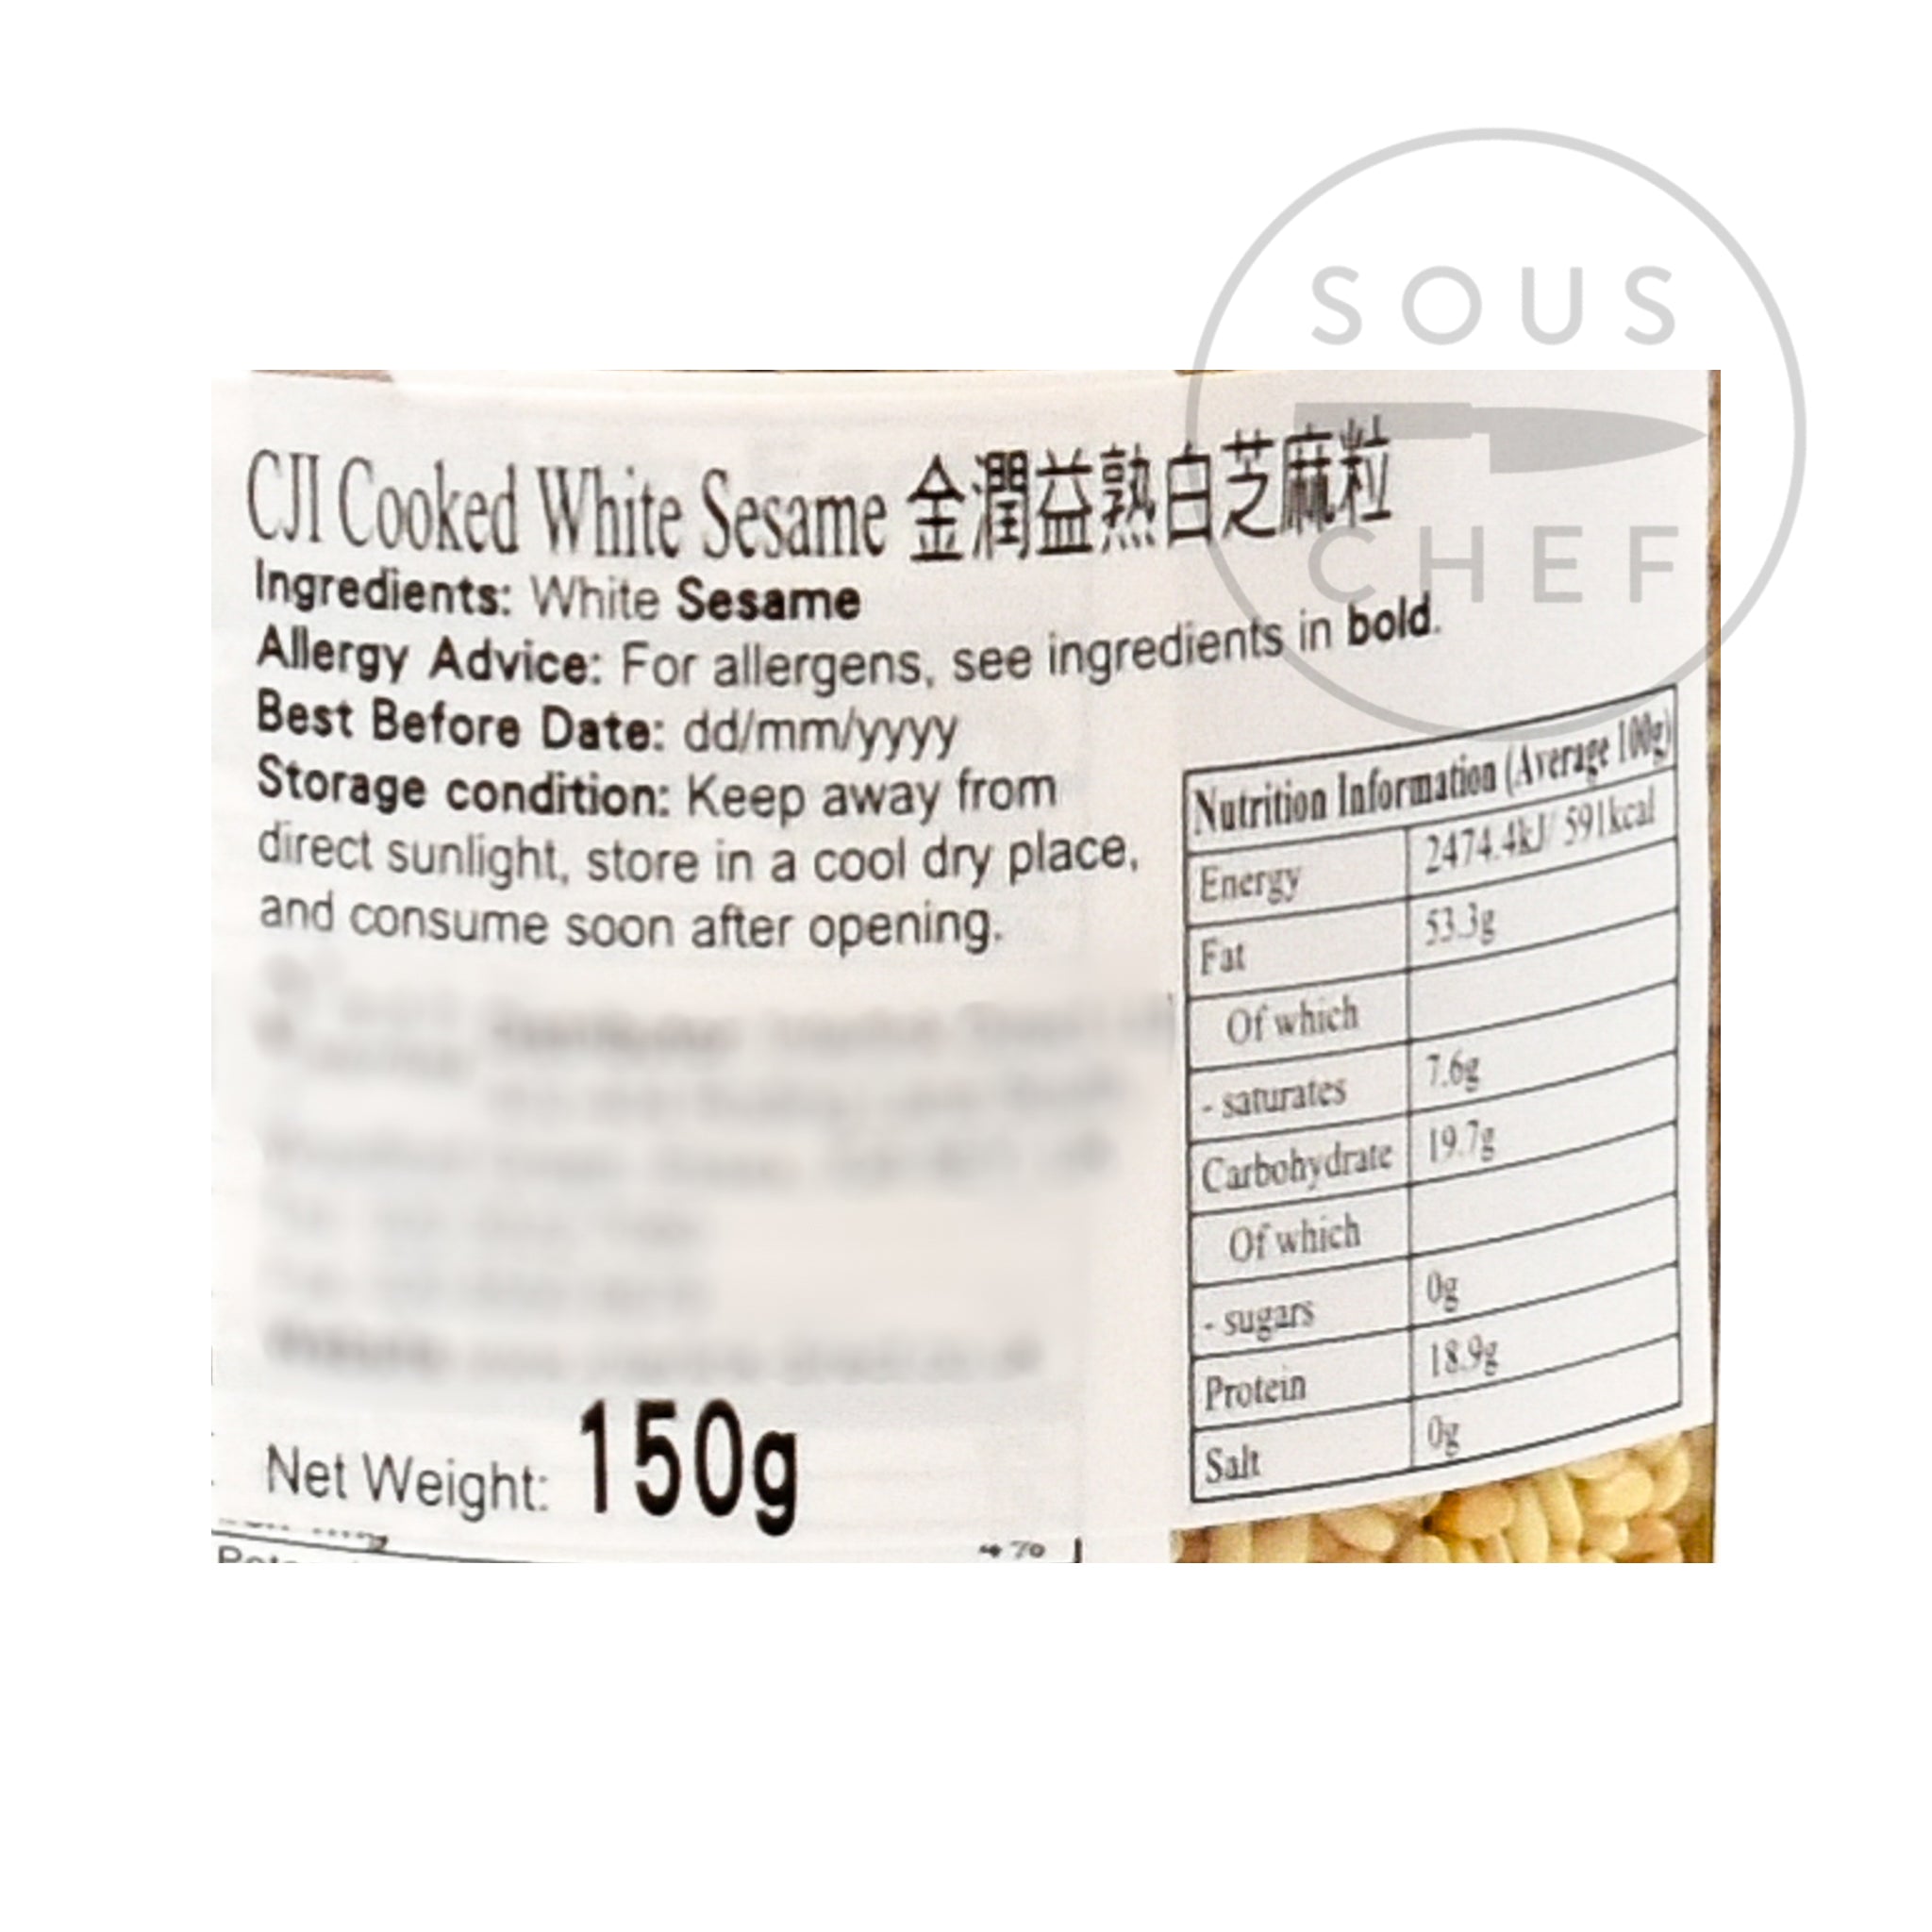 Toasted White Sesame Seeds 150g nutritional information ingredients